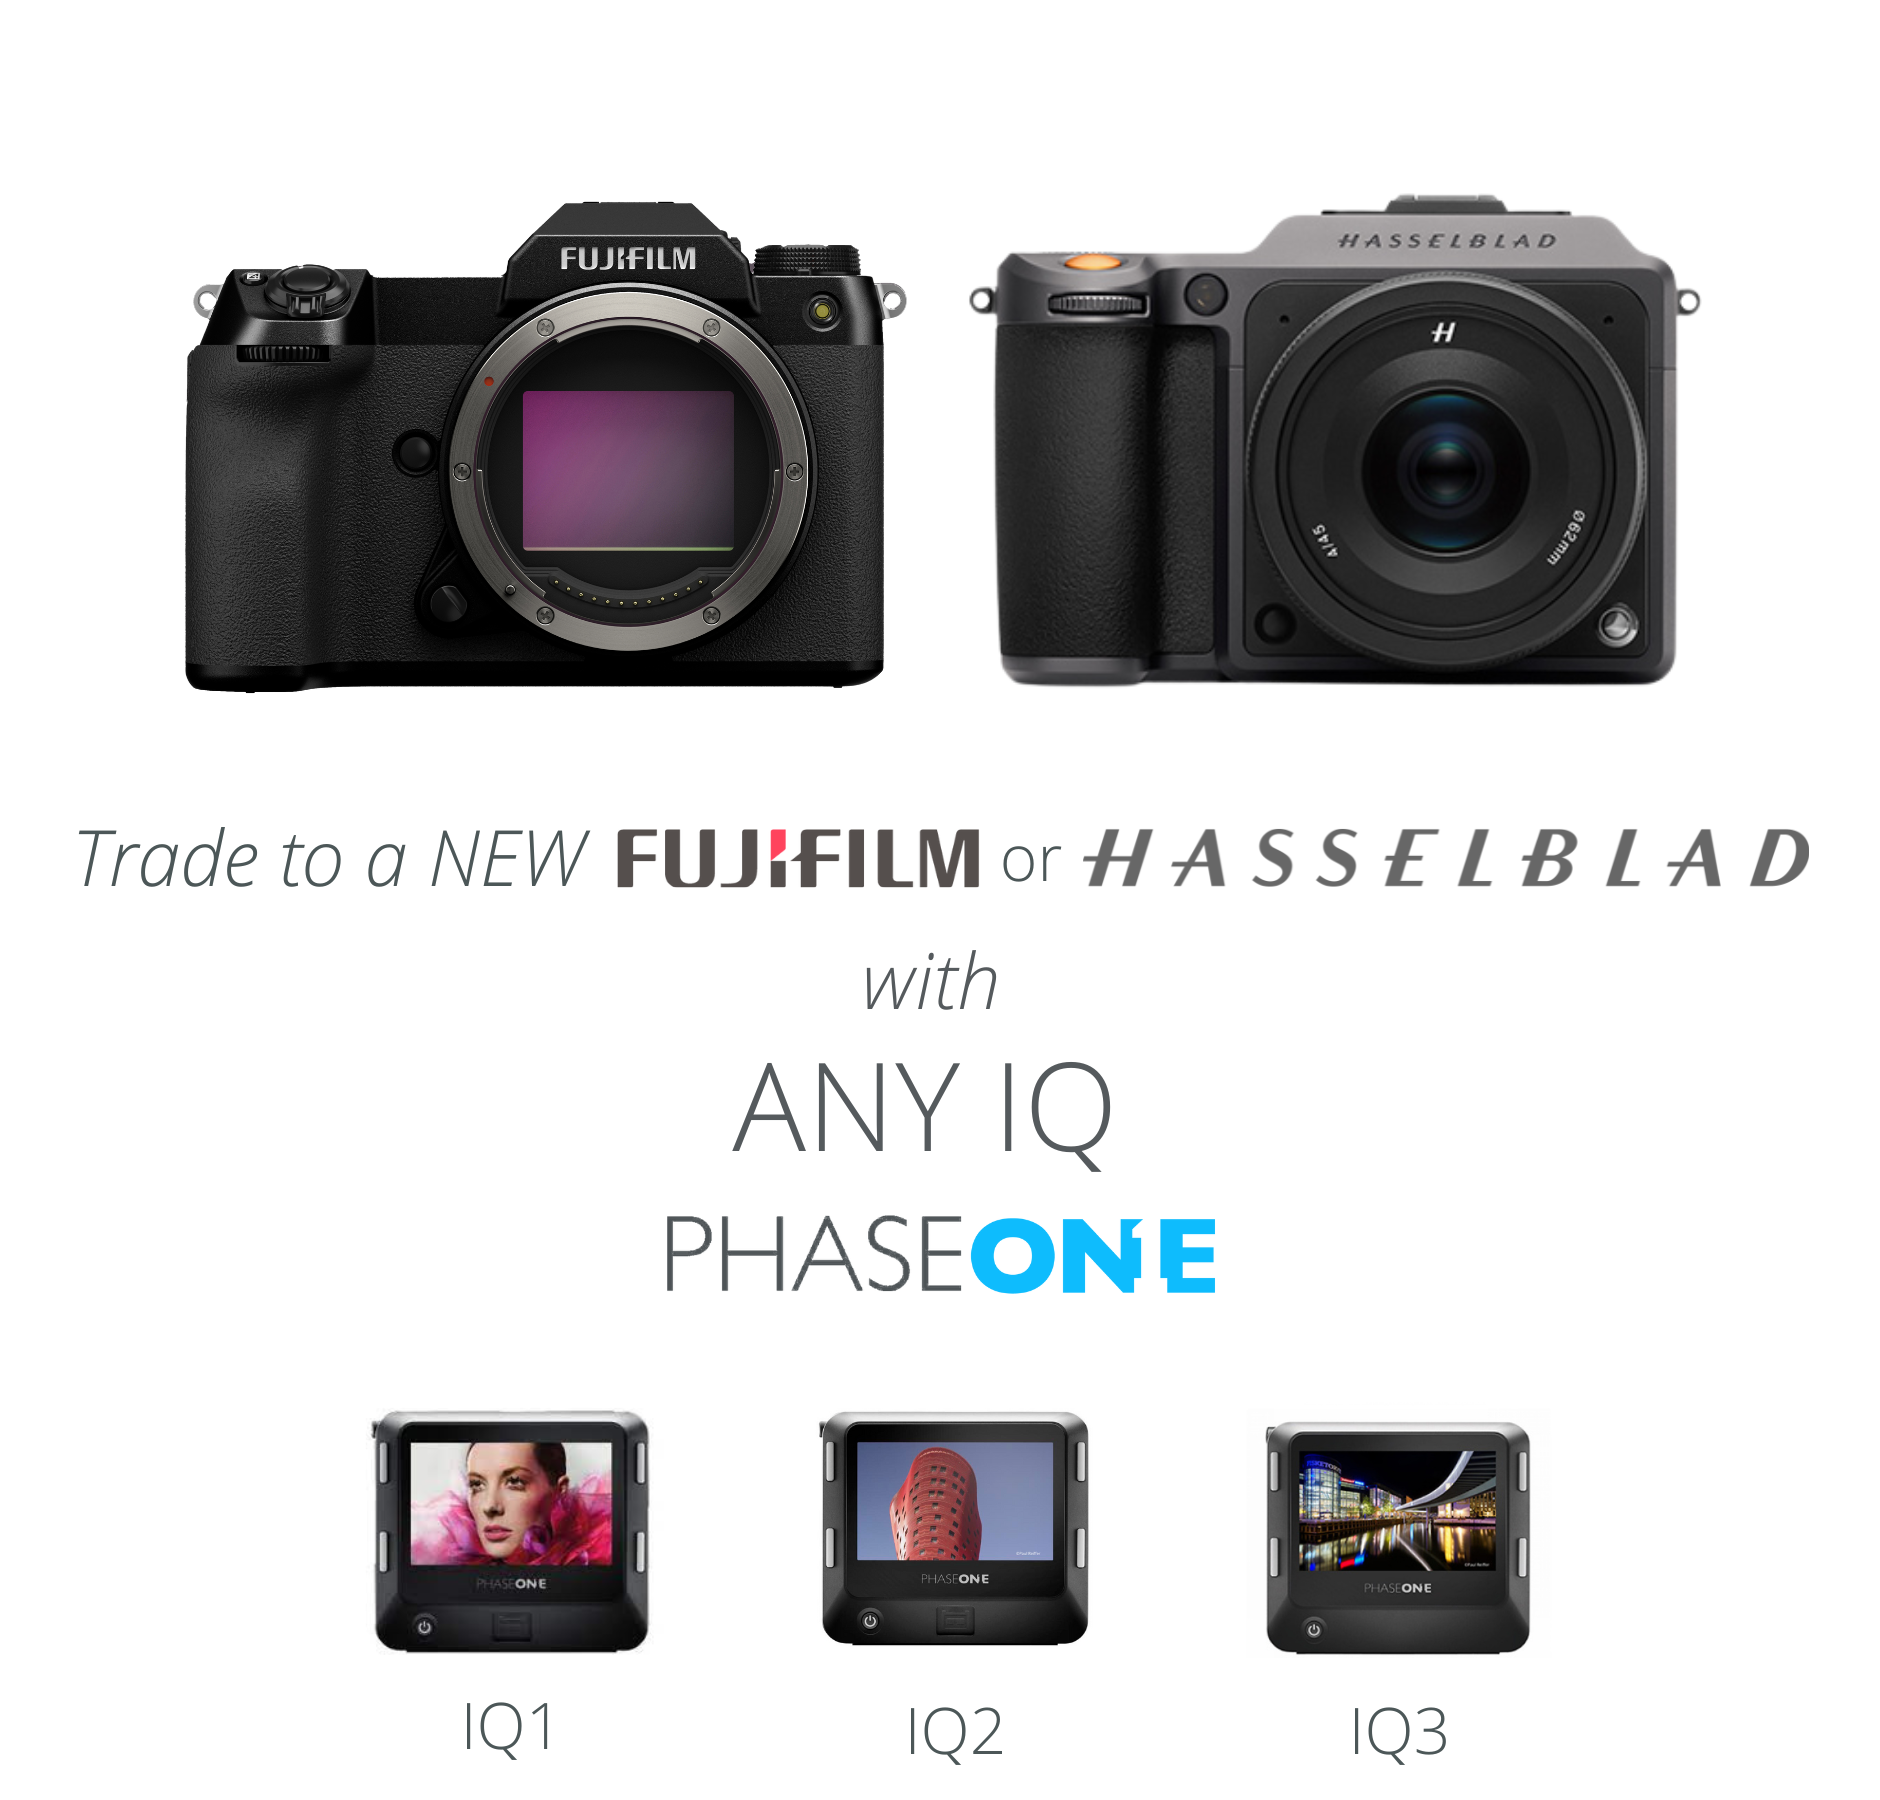 Trade to a Fujifilm or Hasselblad from Any Phase One IQ 